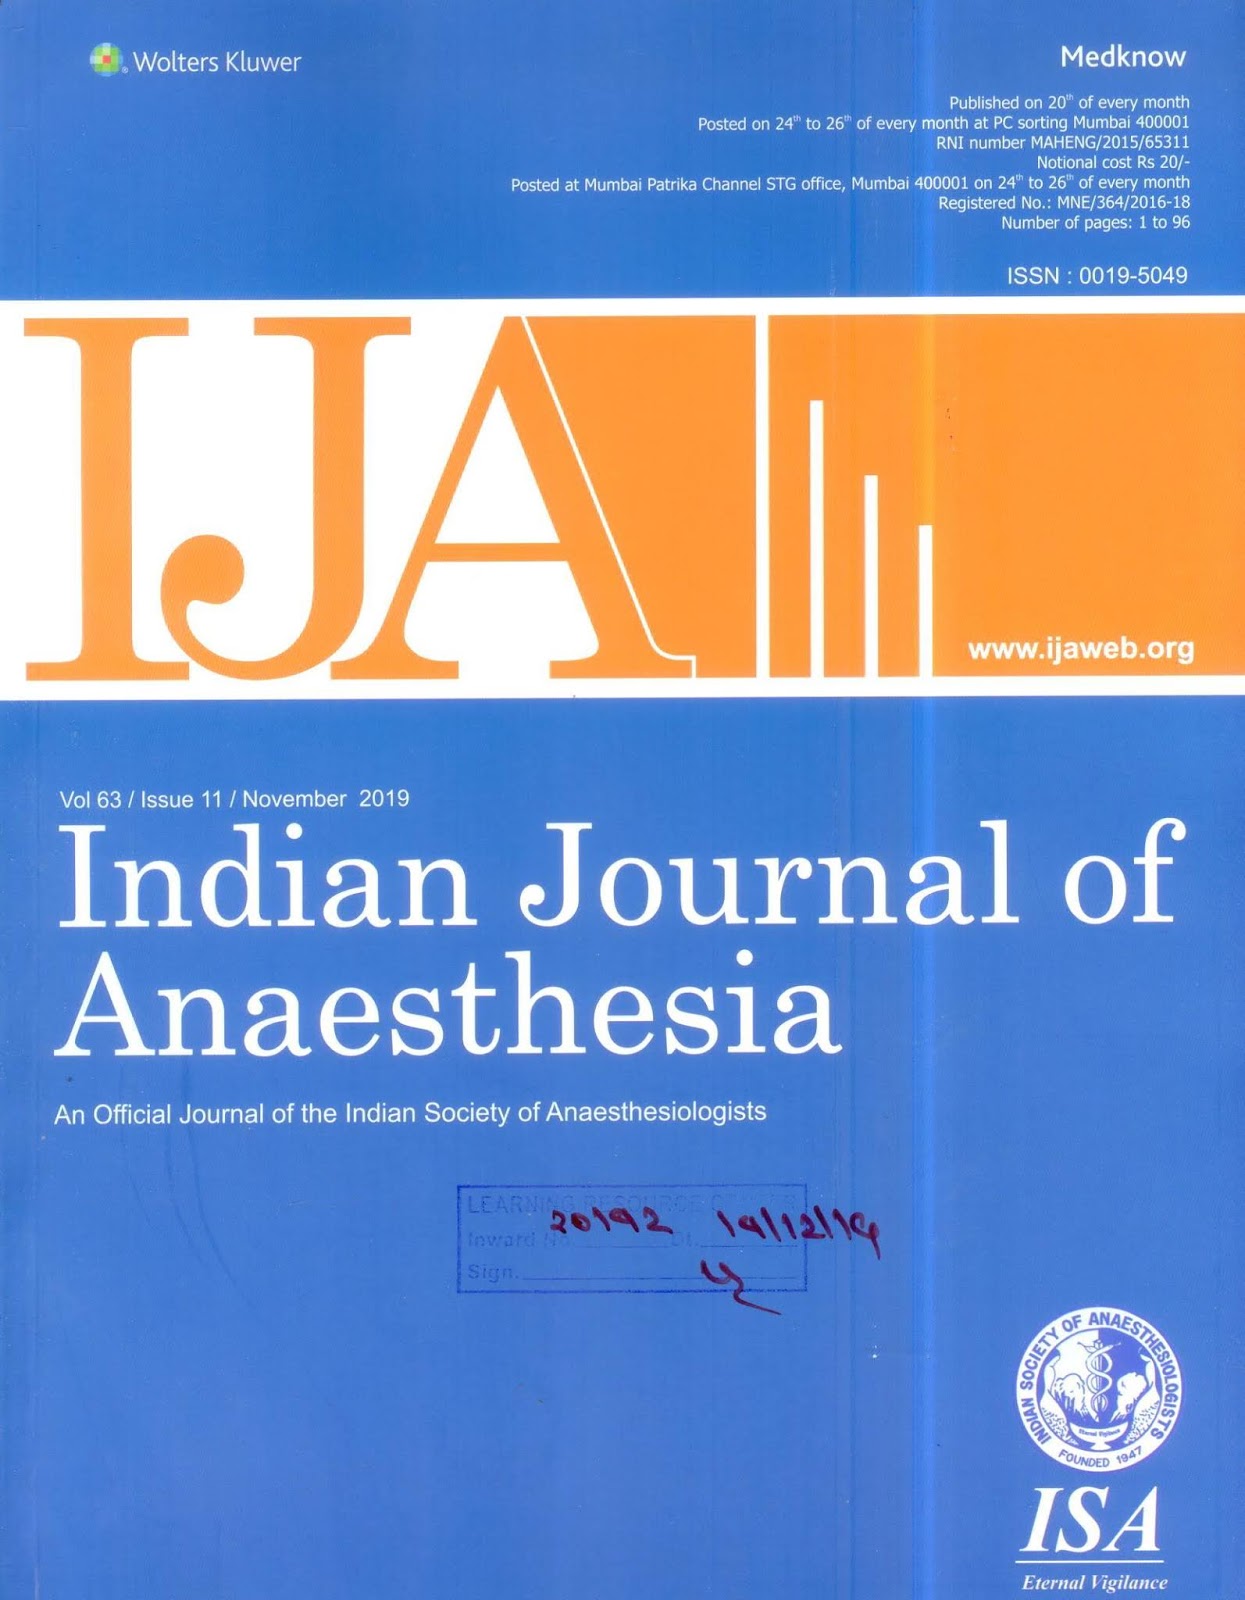 http://www.ijaweb.org/showBackIssue.asp?issn=0019-5049;year=2019;volume=63;issue=11;month=November